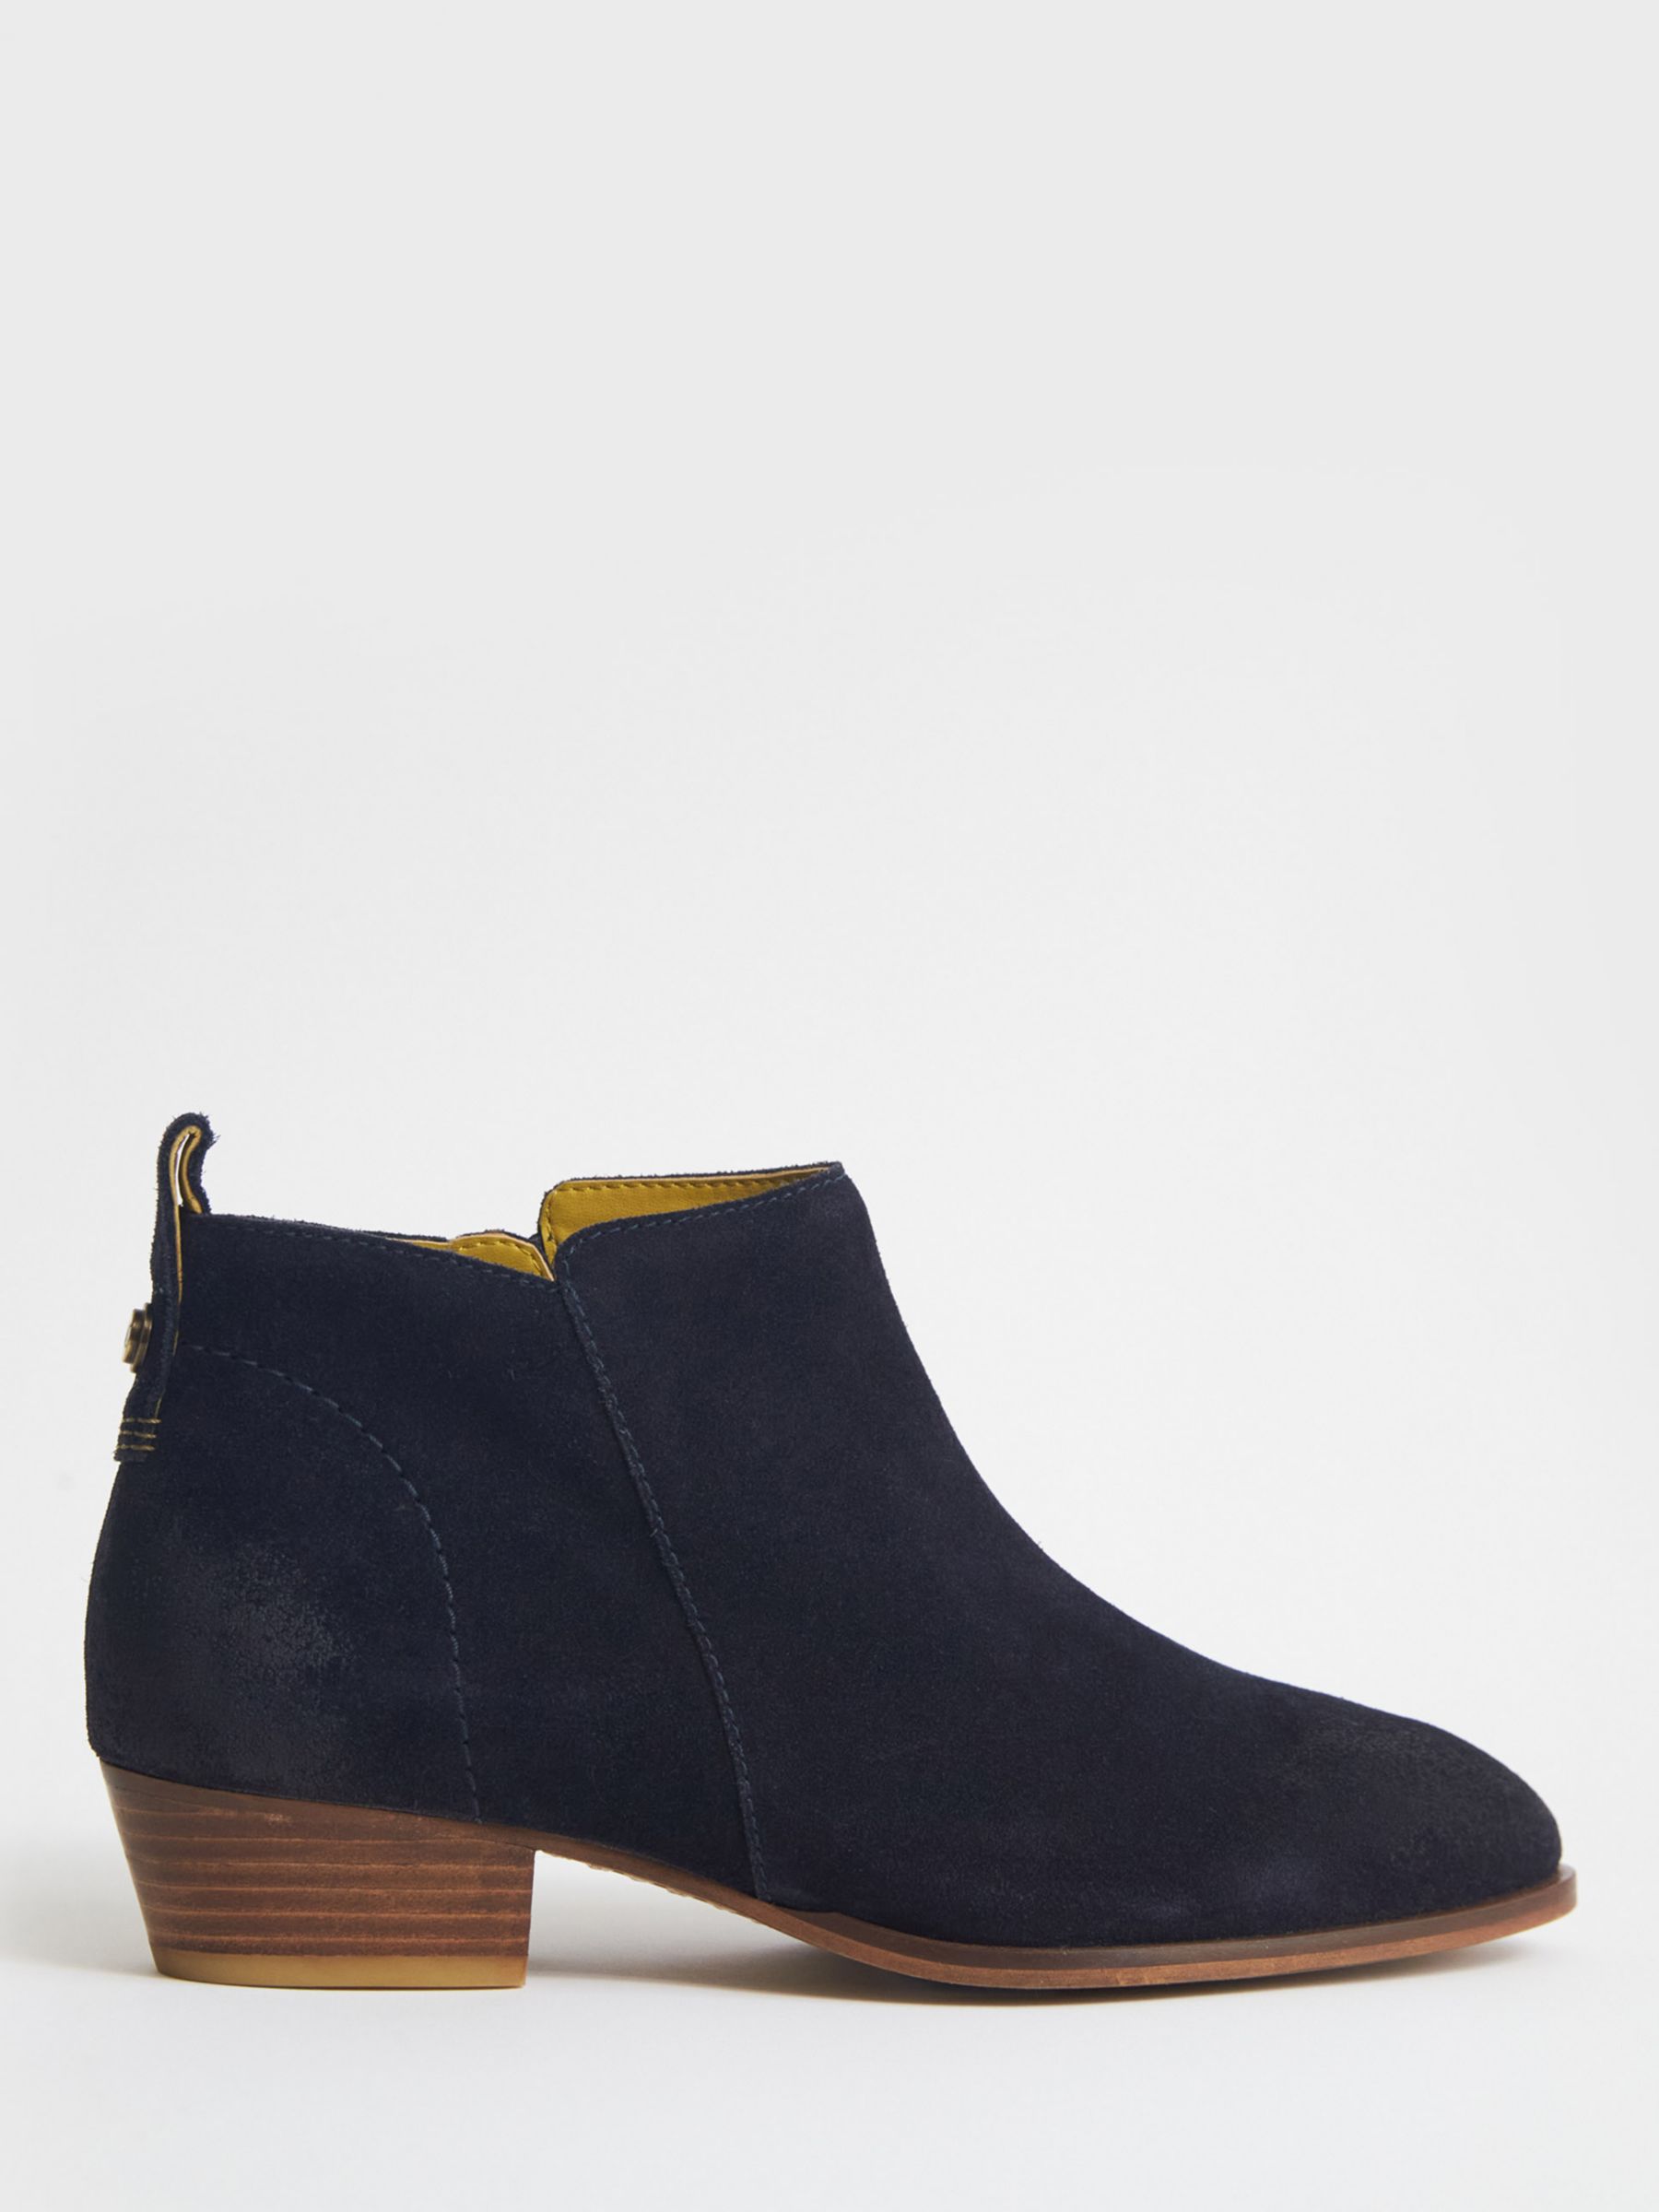 White Stuff Willow Suede Shoe Boots, Navy at John Lewis & Partners